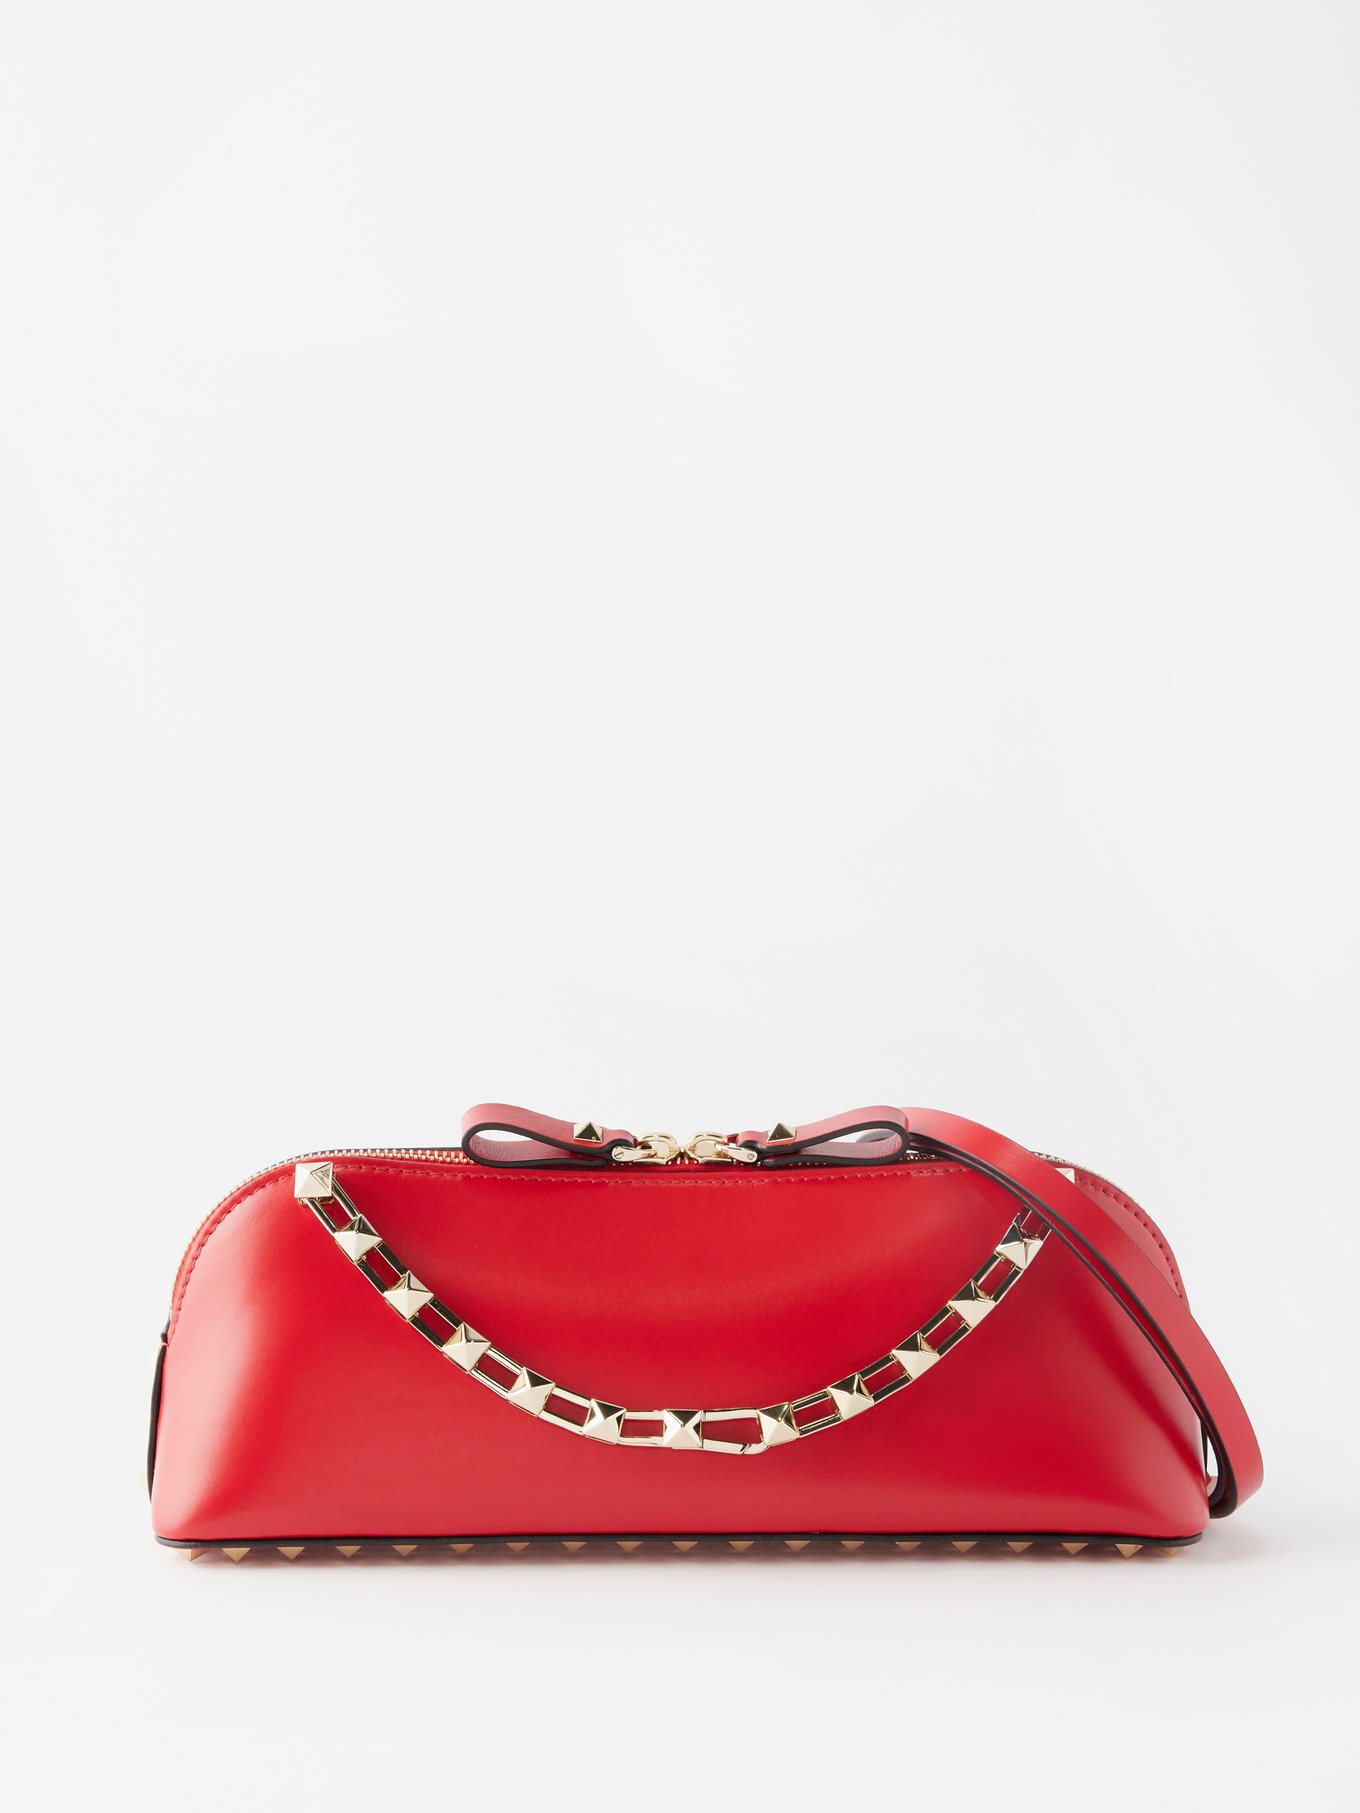 Valentino Red Patent Leather Rockstud Double Handle Tote Bag